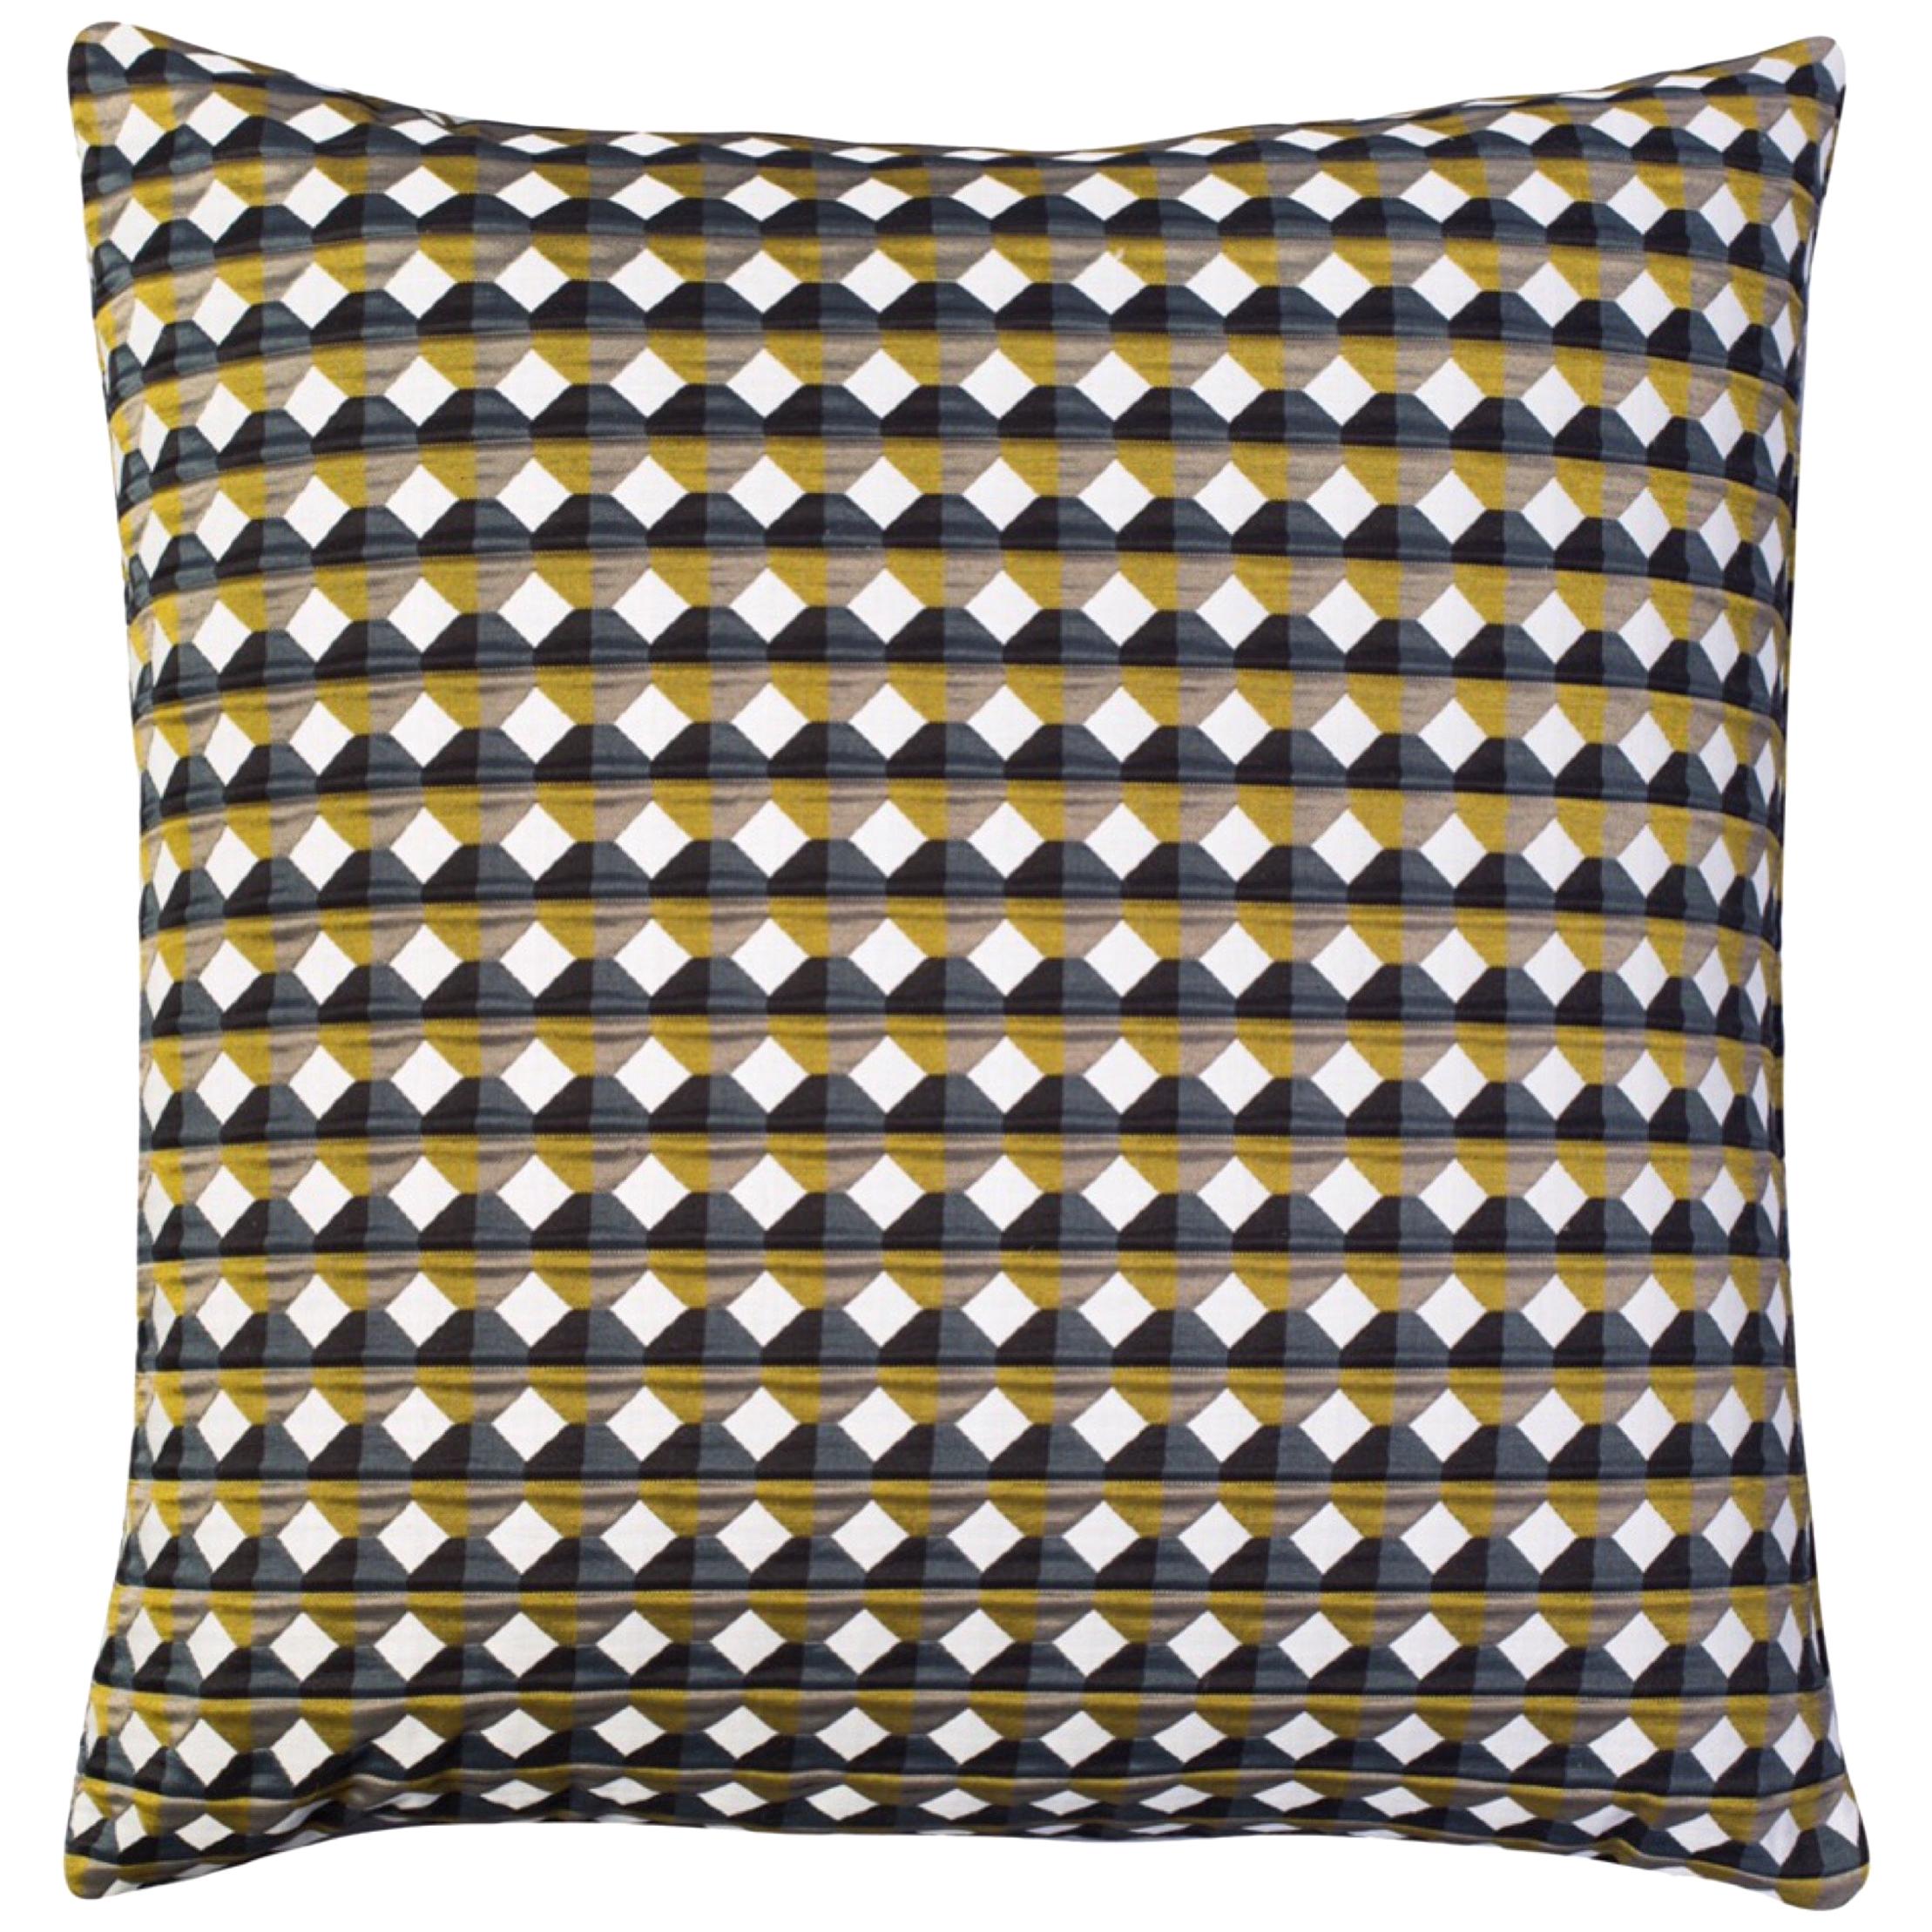 Rio Pattern Cushion Curvature Collection Inspired by Brazilian Architecture